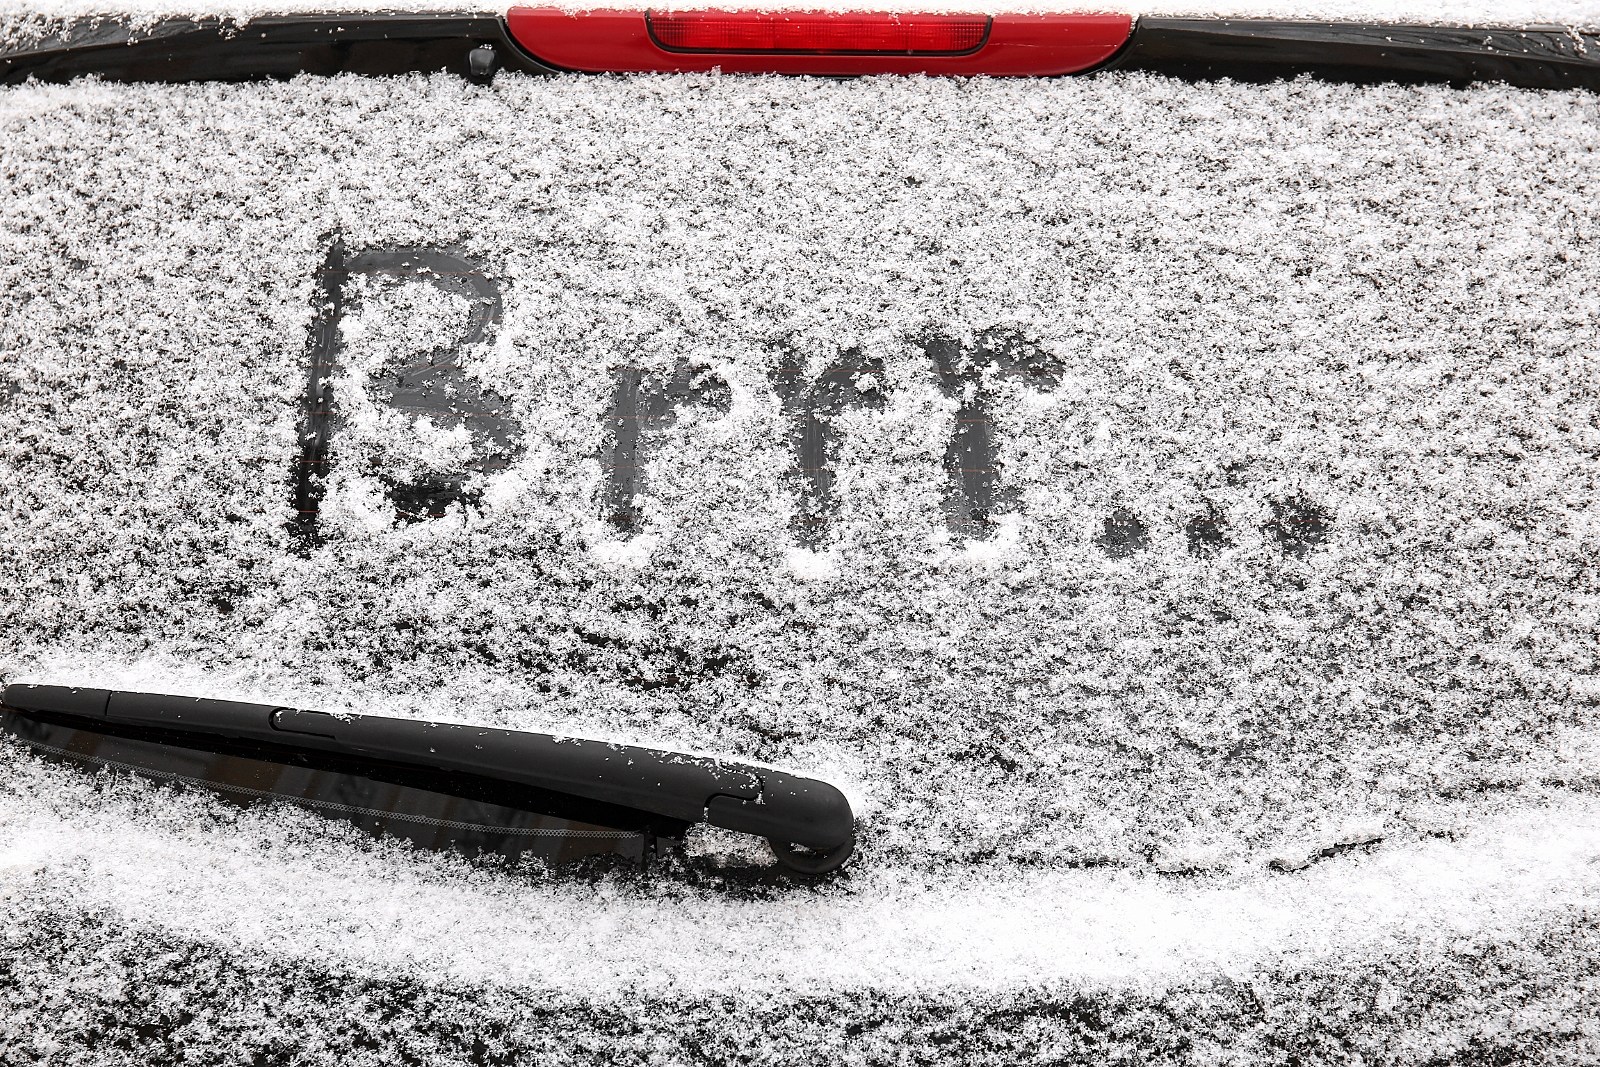 Does 'Warming Up' Your Frozen Car Really Matter